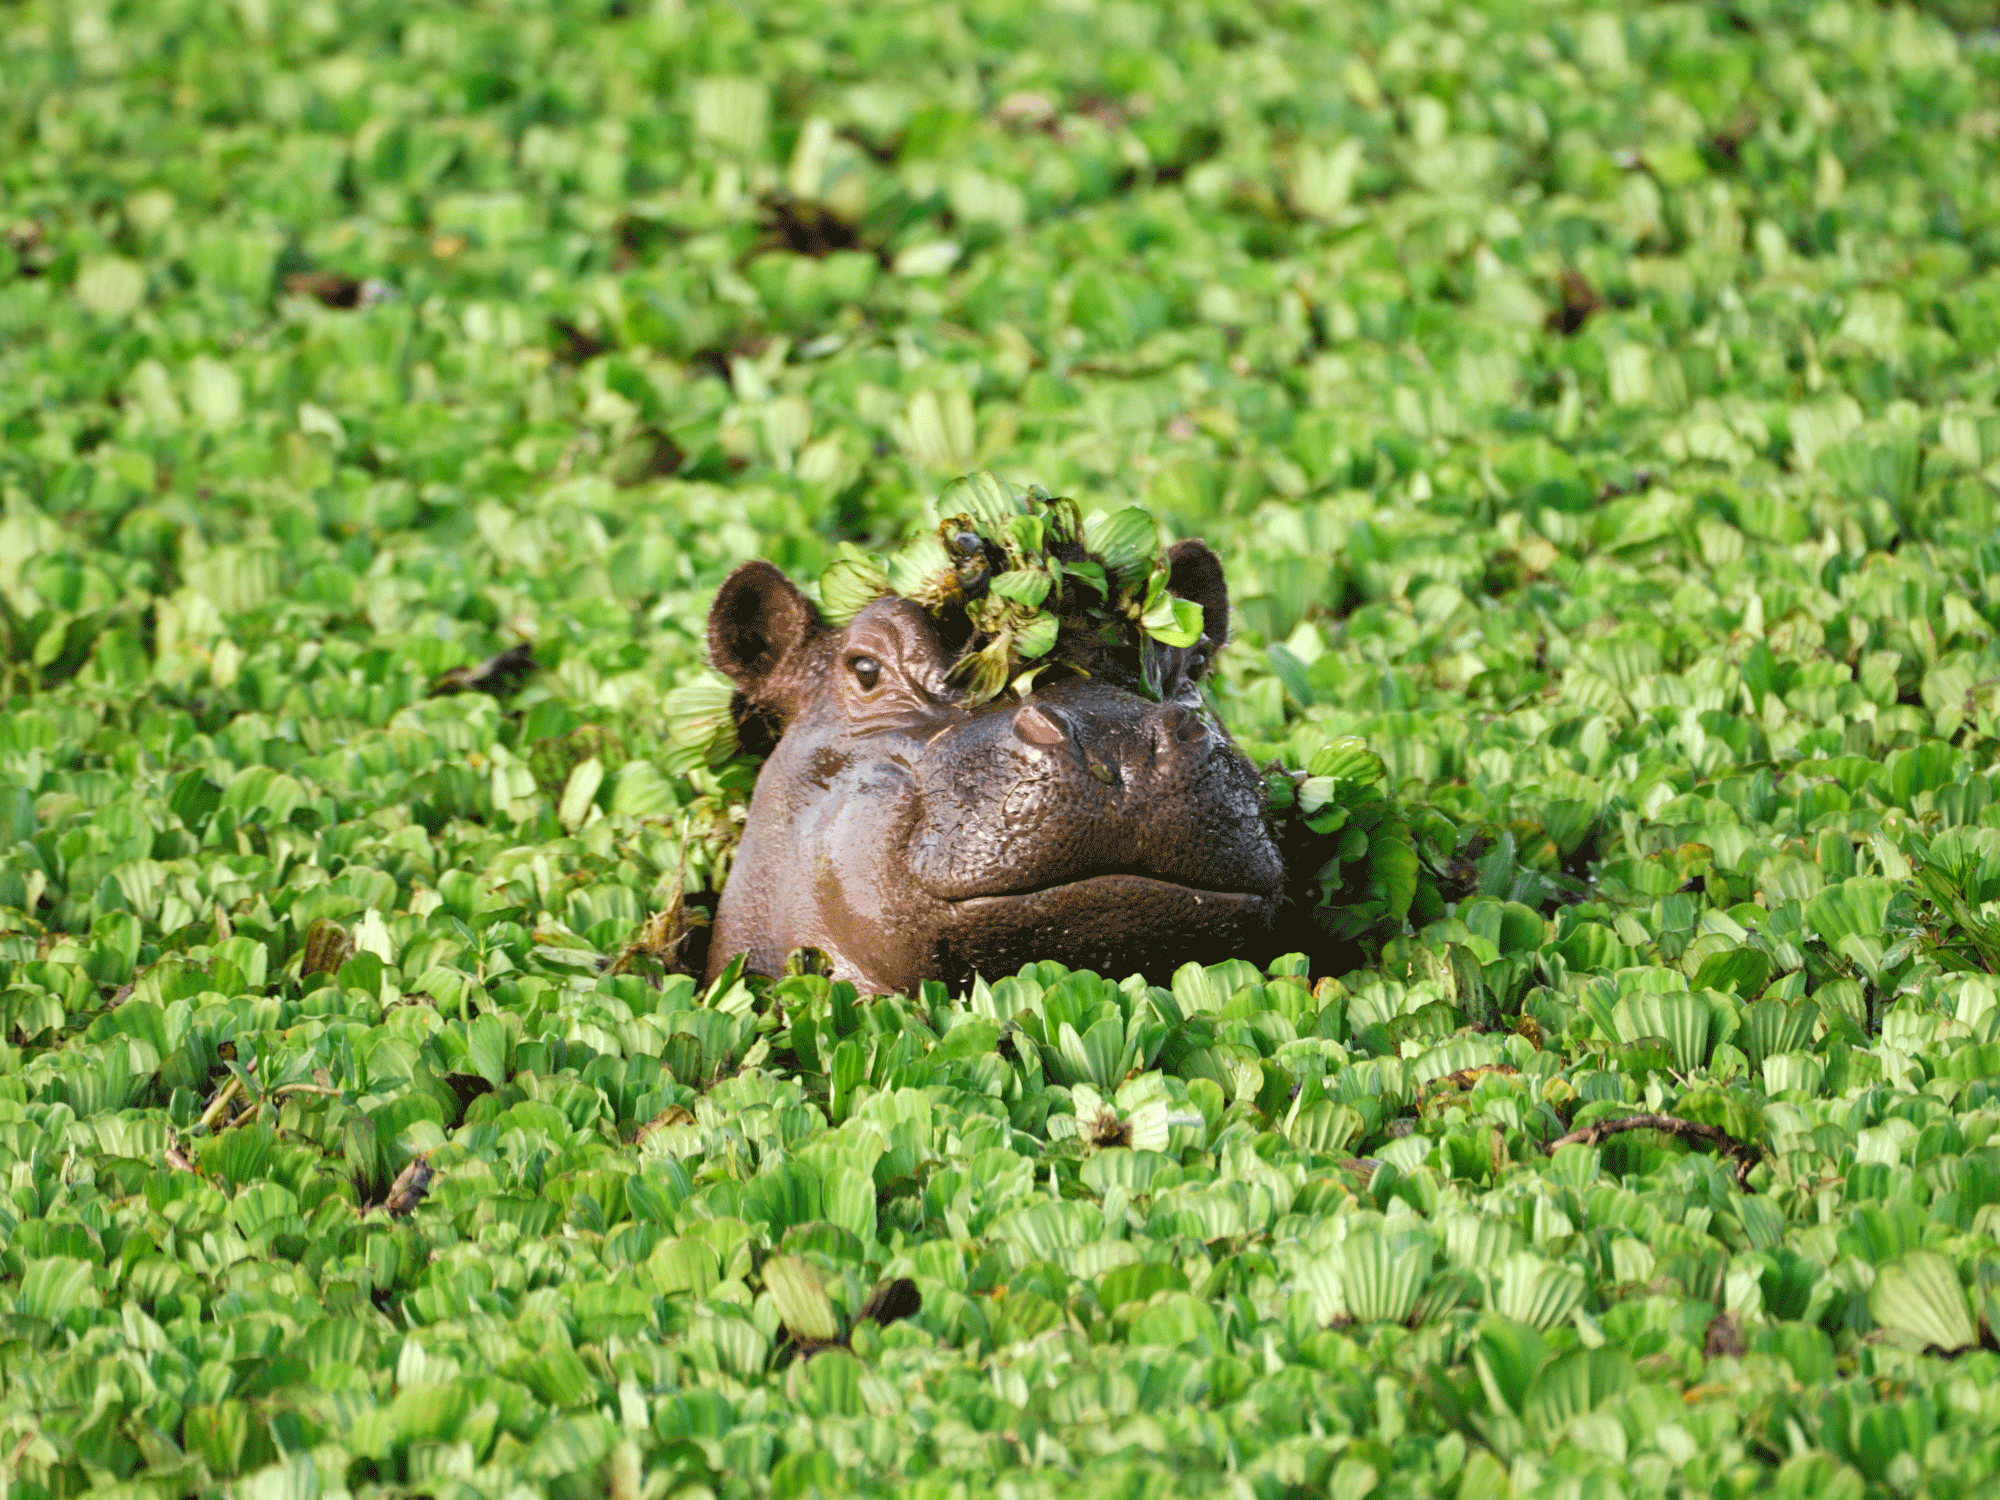 Hippo looking out of greenery